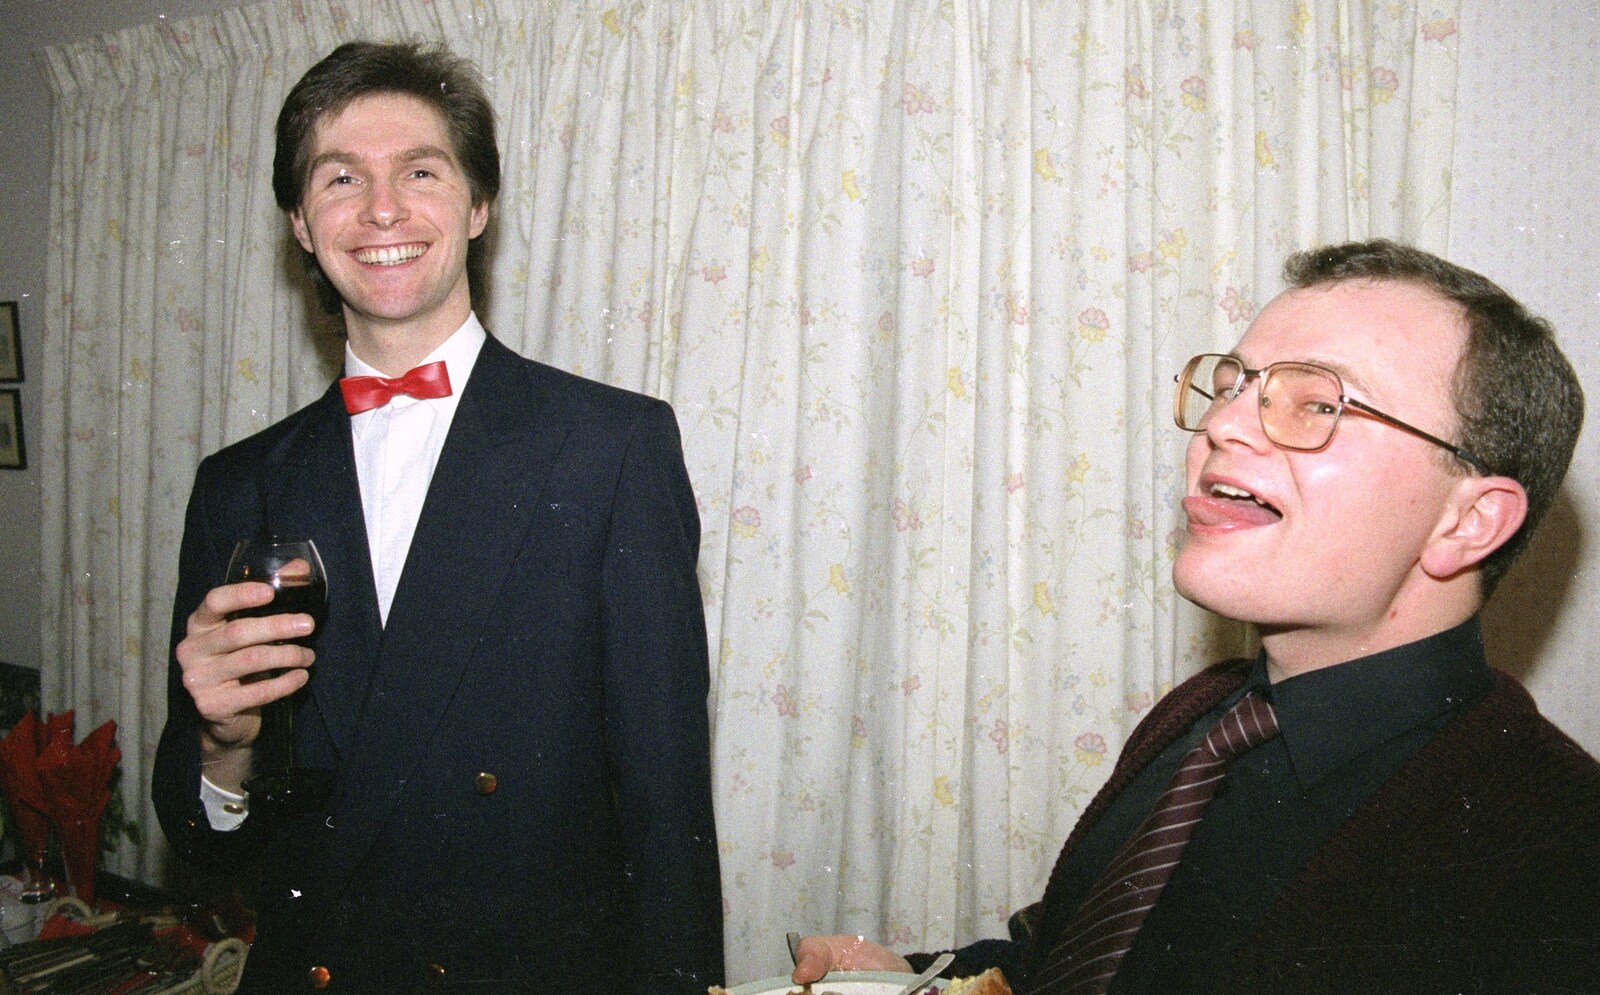 Sean and Hamish from New Year's Eve at Phil's, Hordle, Hampshire - 31st December 1990